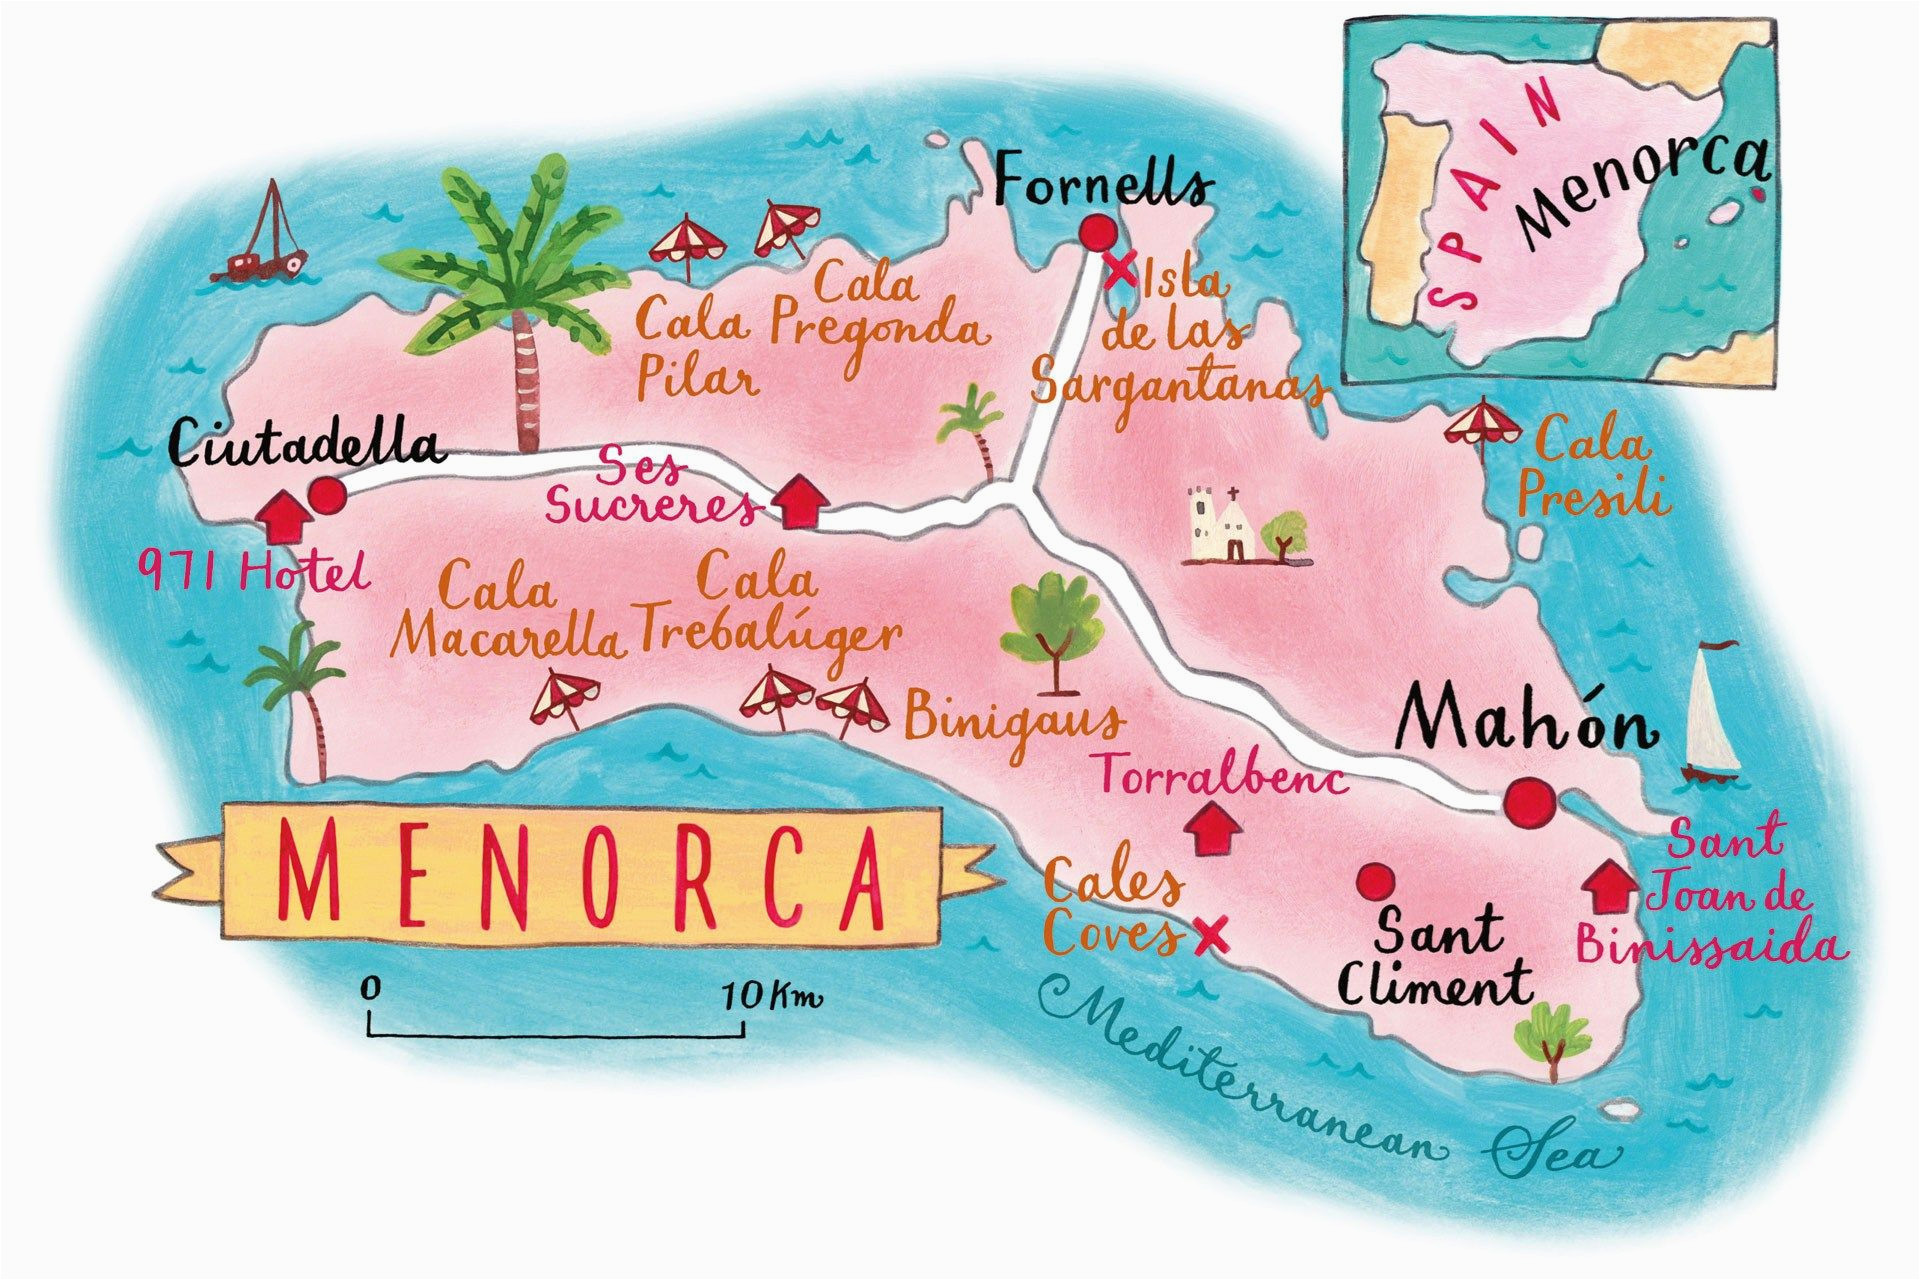 menorca the beat free balearic island places to go